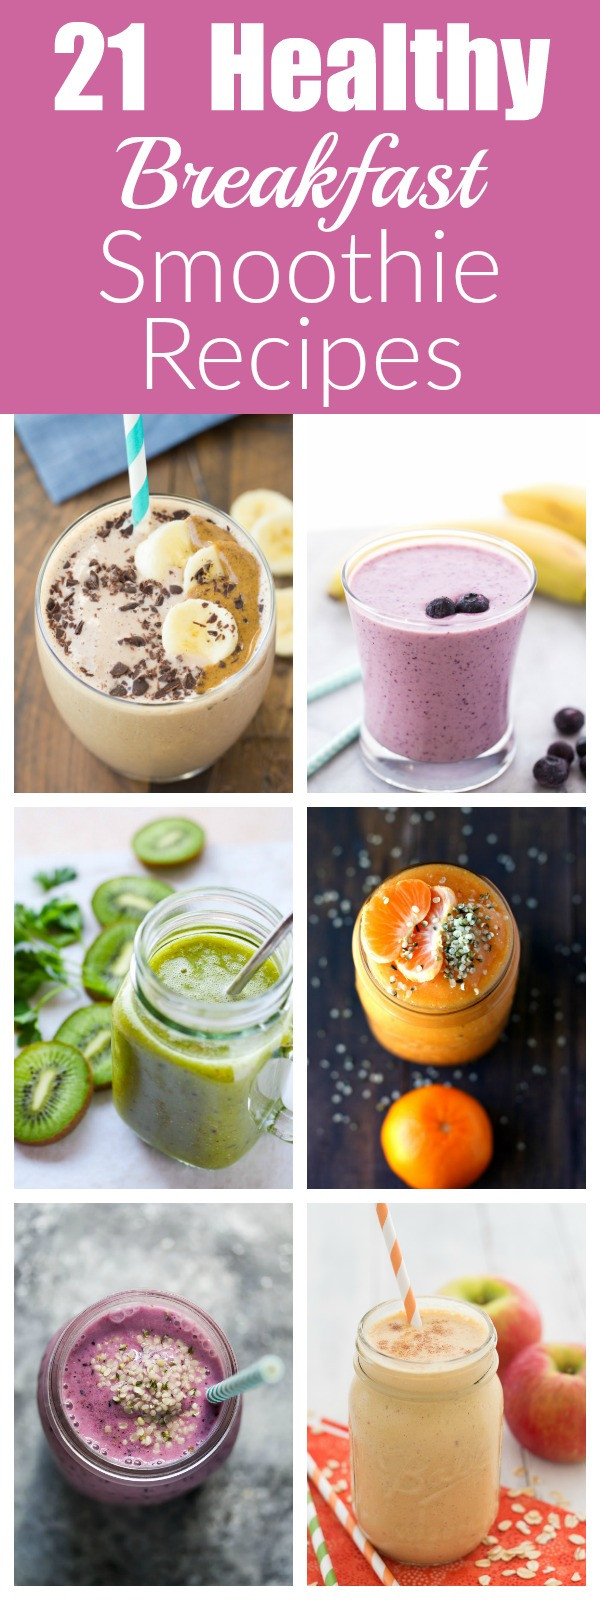 Morning Smoothie Recipes
 21 Healthy Breakfast Smoothie Recipes